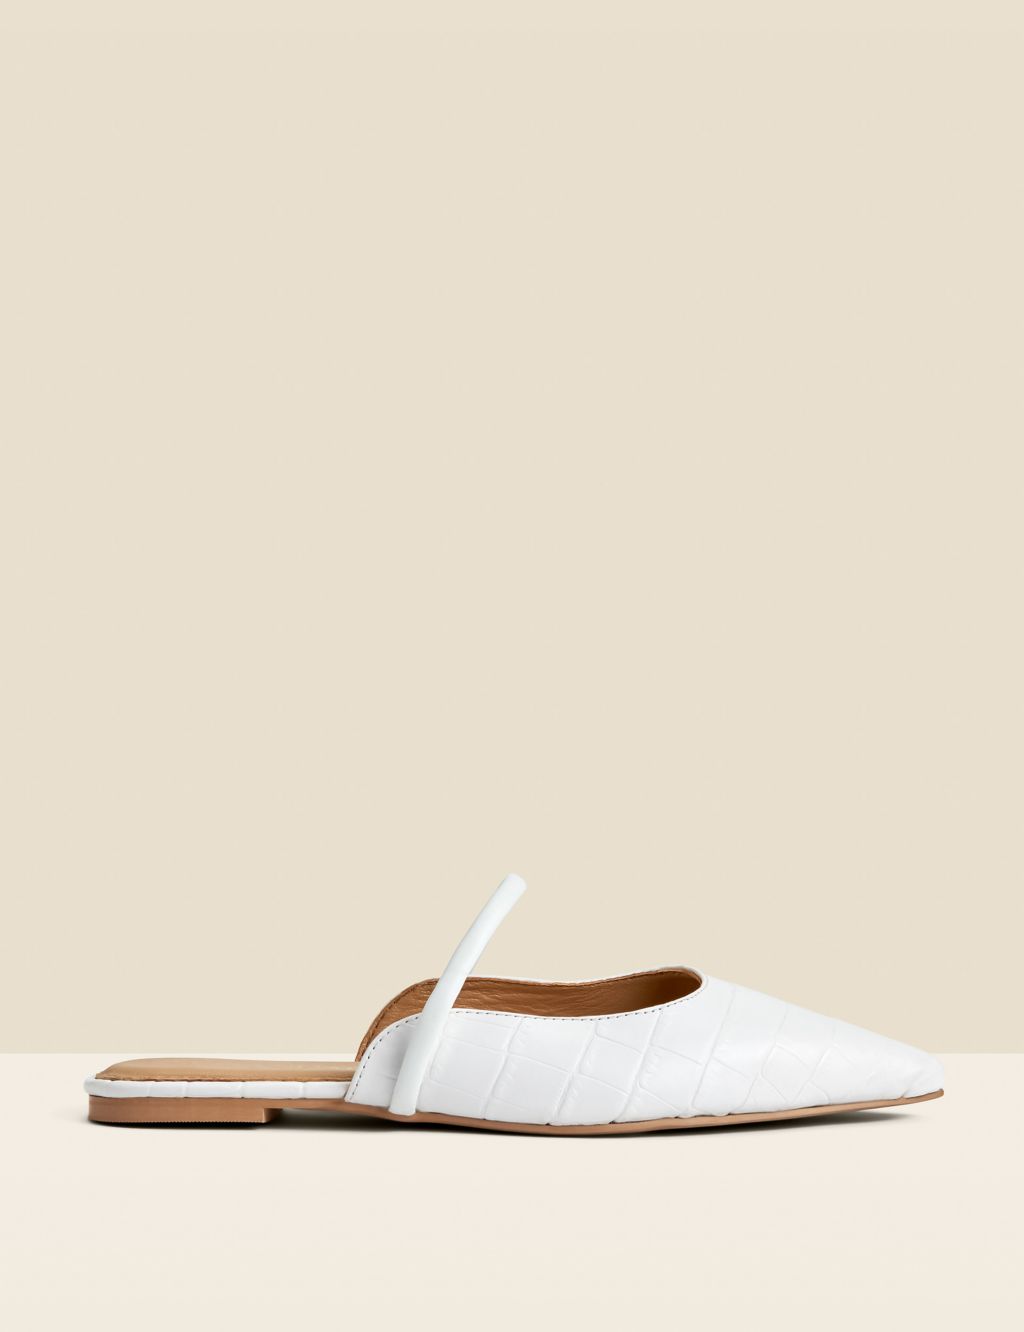 Leather Croc Strap Detail Flat Pointed Mules